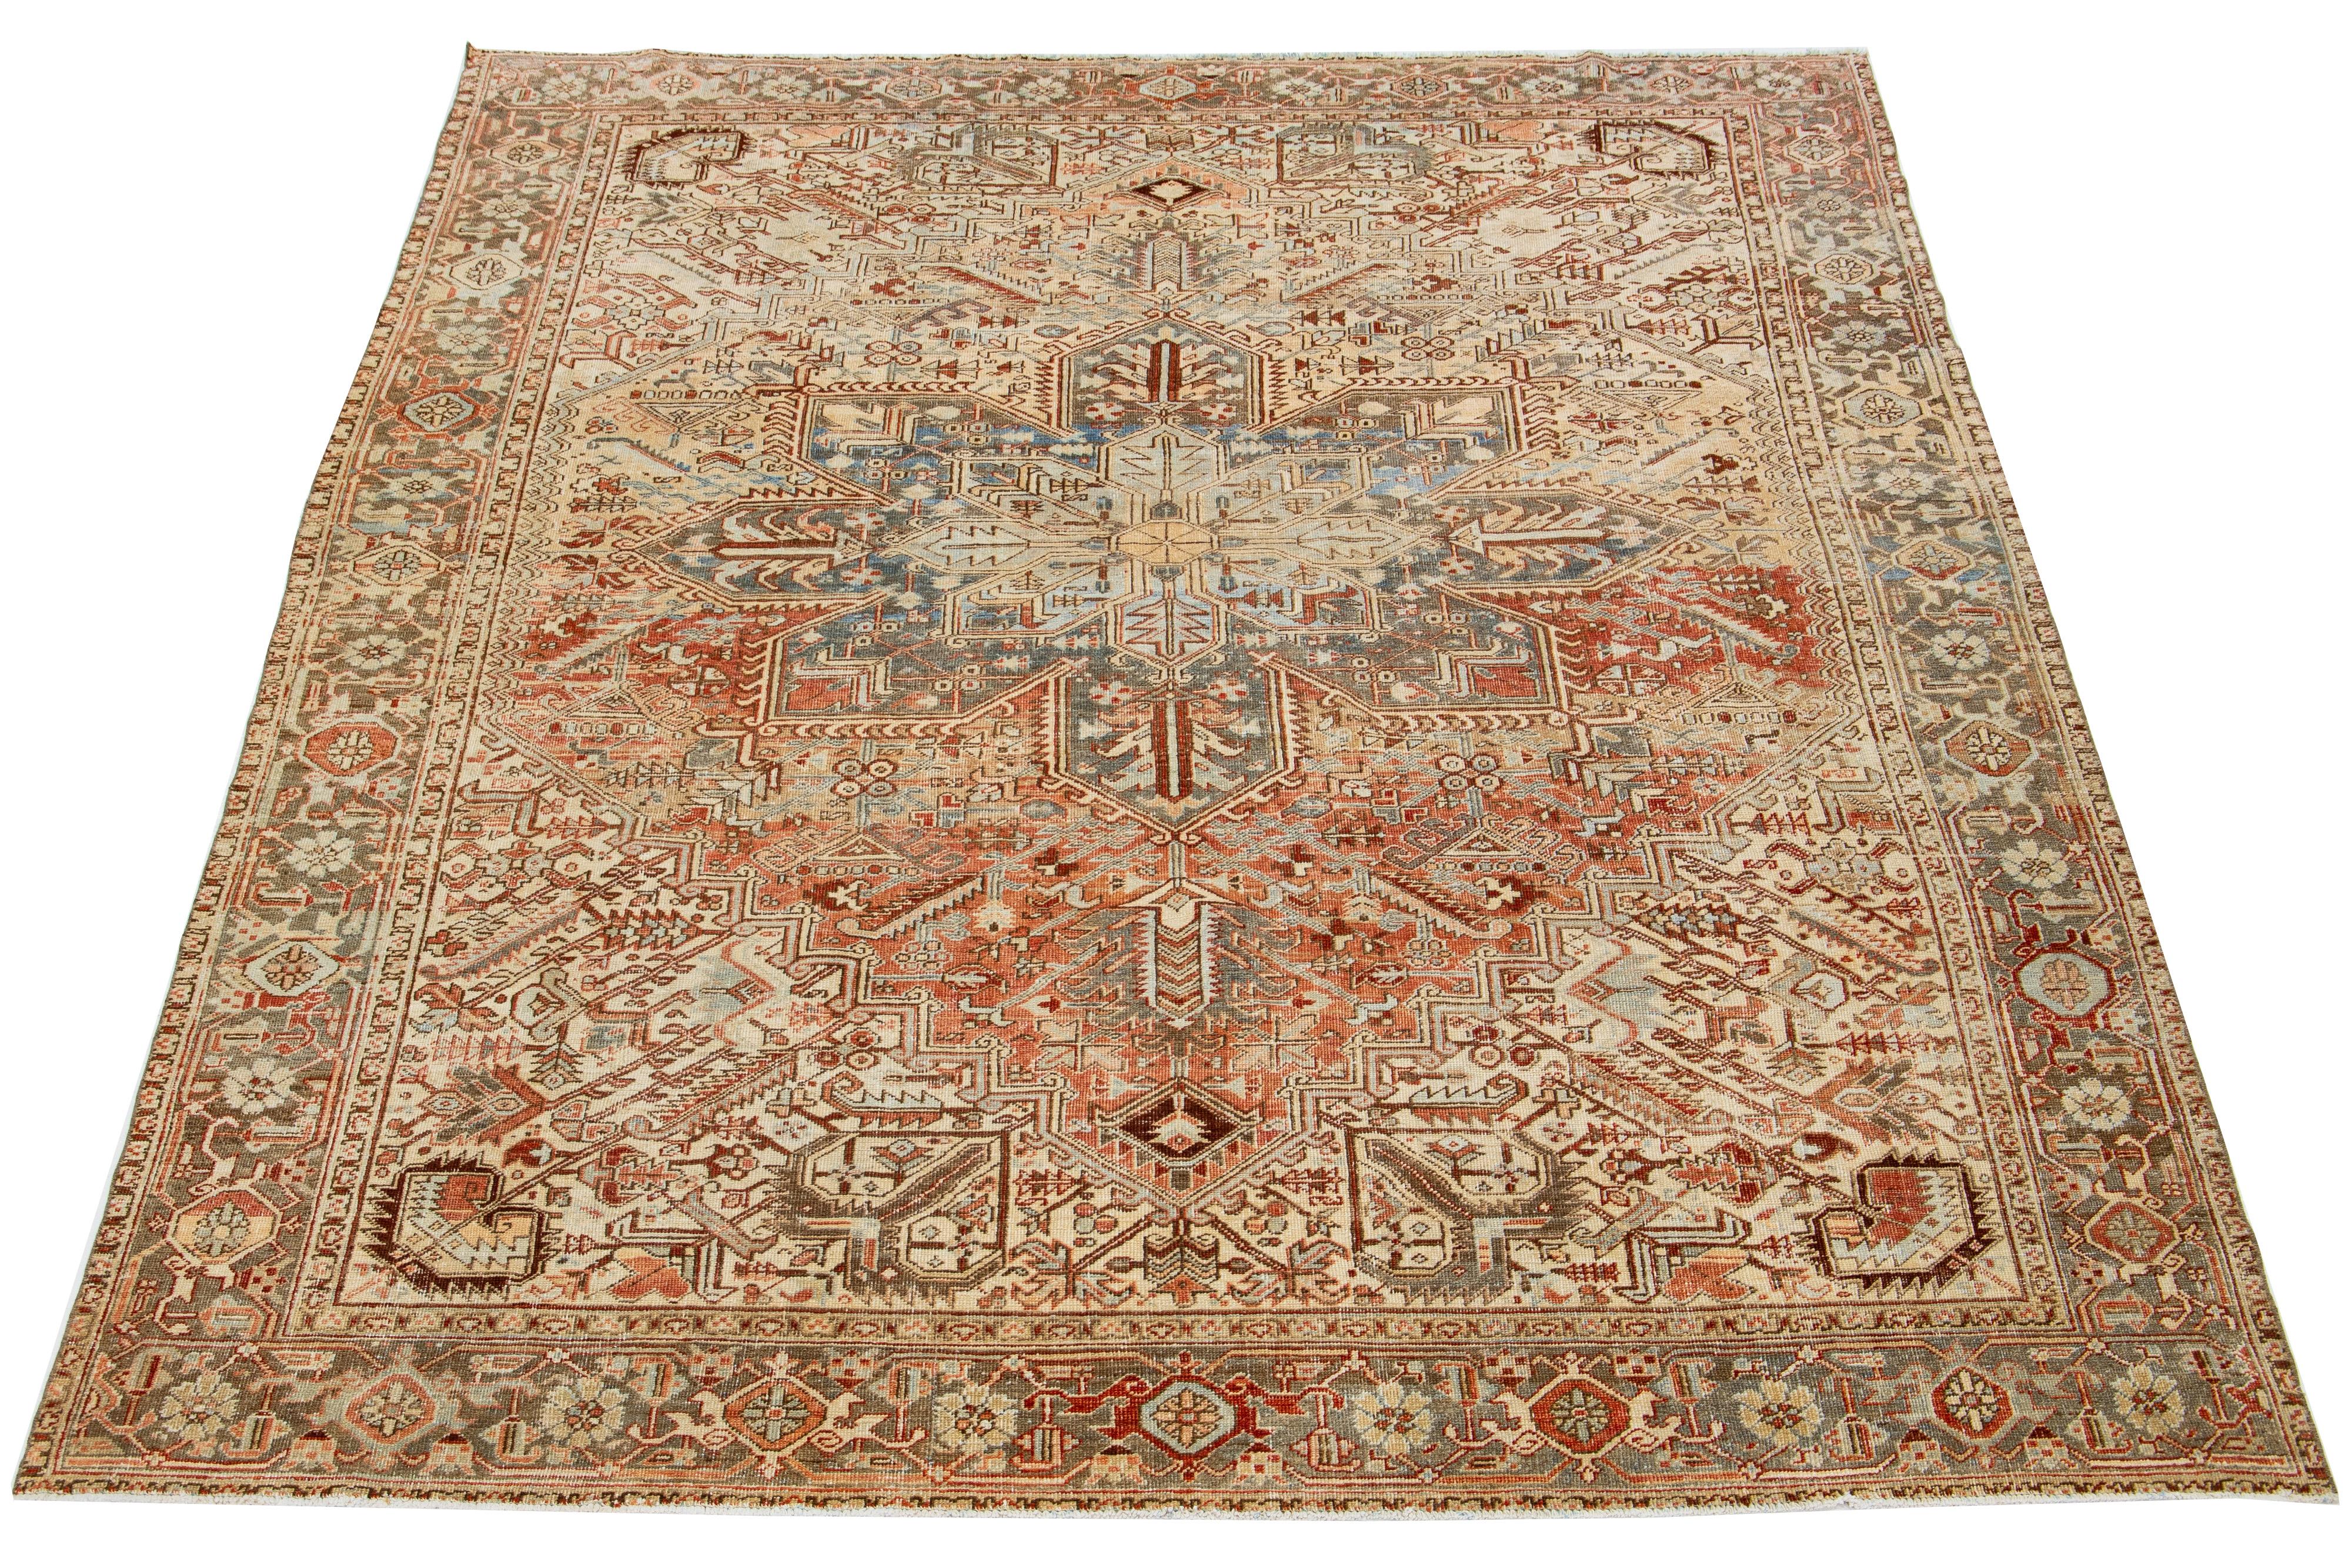 This antique Persian Heriz rug features a captivating allover pattern with shades of blue, rust, brown, and ivory on a peach field. It is hand-knotted using wool.

This rug measures 8'8' x 10'10